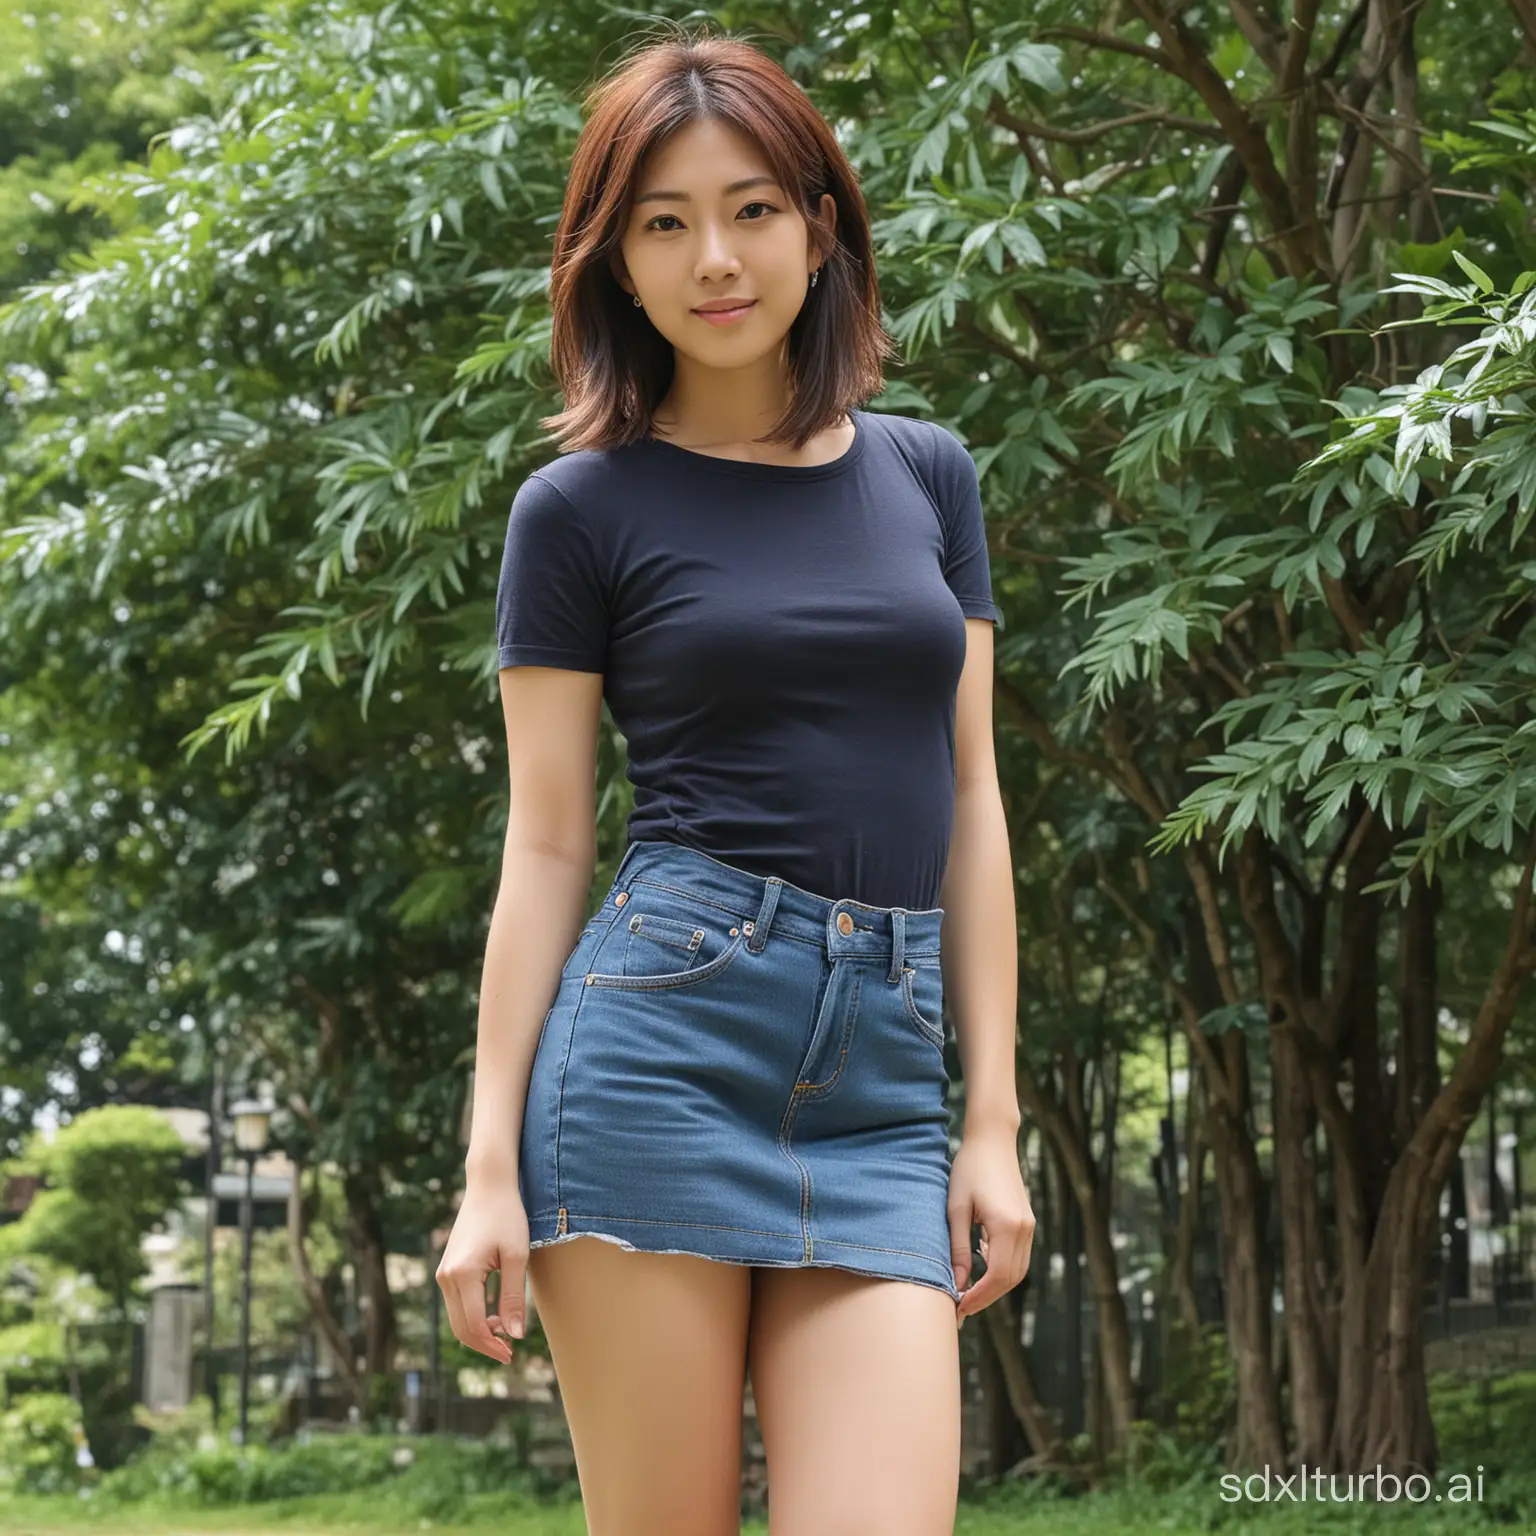 A Japanese woman in her mid-20s, standing while wearing a denim mini skirt. Her legs are moderately thick, accentuating the lines of her thighs. The background features the greenery of a park. looking at viewer,Japanese beauty woman full body image of realistic real people taken before the age of 25,ultra-detailed face, Legs are a little thickernot worst quality,not ugly,not bad anatomy,not jpeg artifacts,not bad hands,not missing limb,not ugly face,not bad face,not missing_limb,not sketch,not oil painting,not watercolor,not monochrome,not flat color,not flat shading,not retro style,not ink,not multiple people,not male